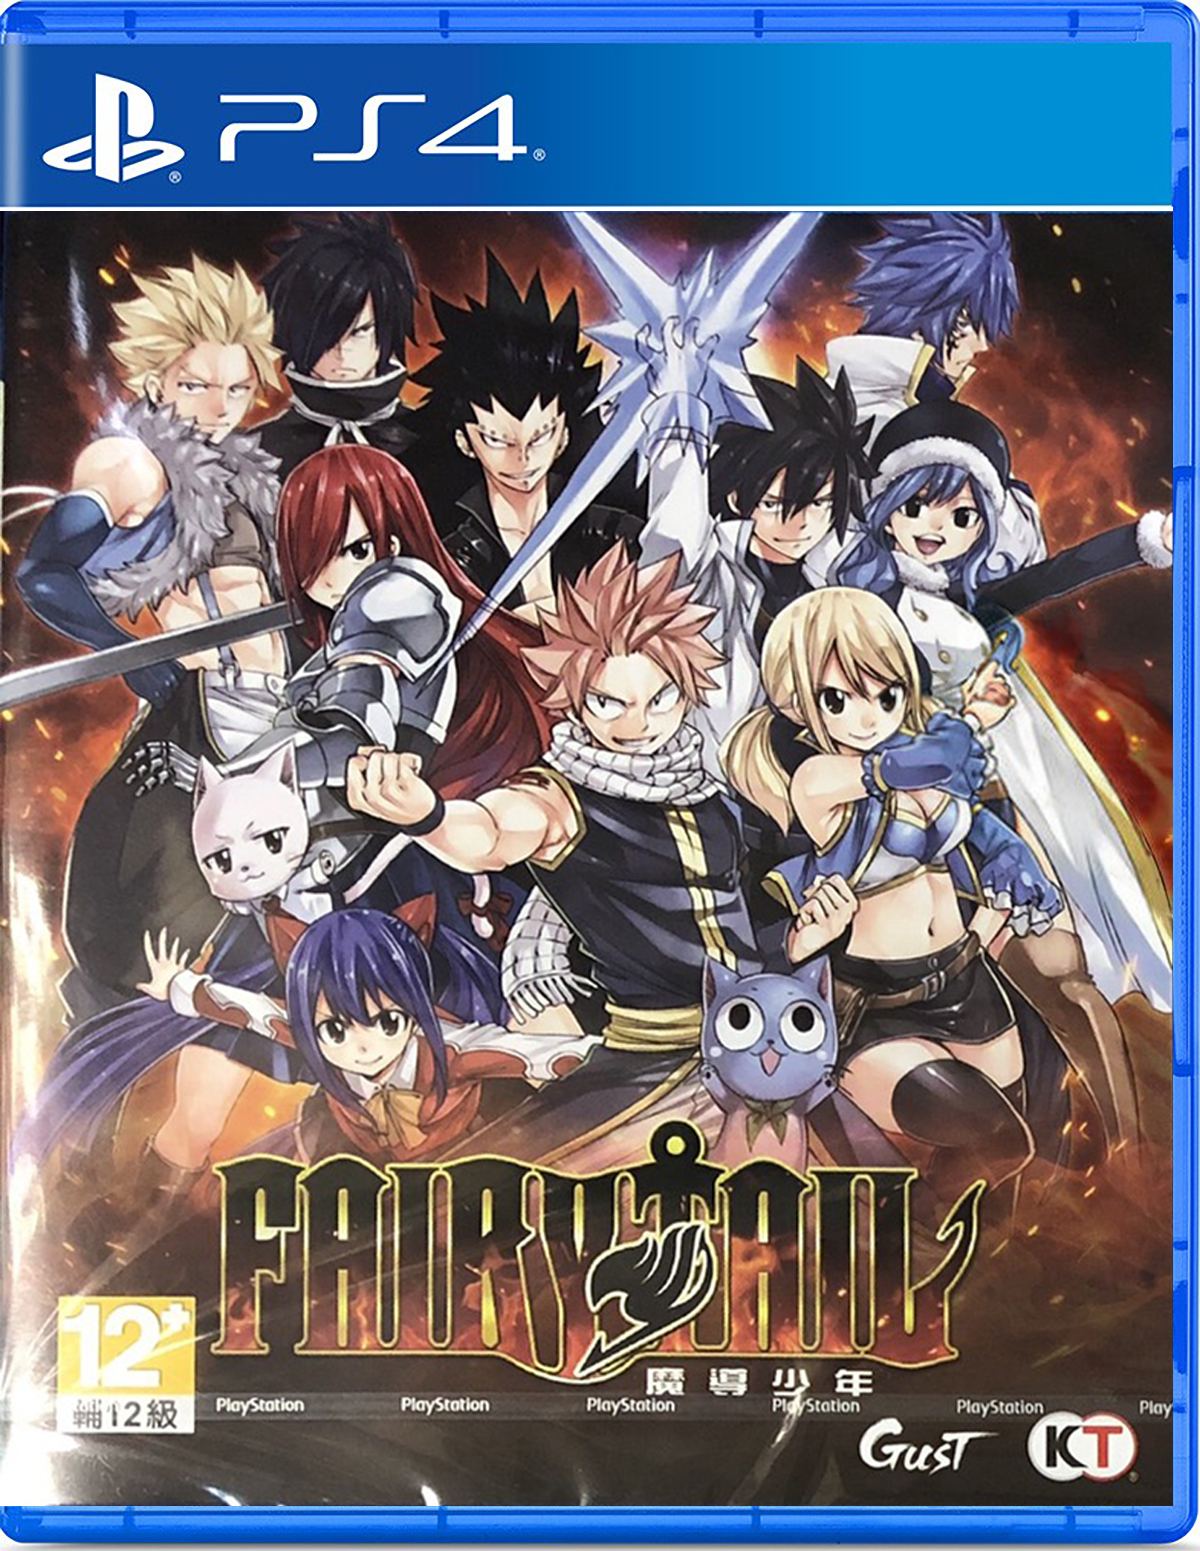 Fairy Tail (Guild Box) [Limited Edition] (Chinese Subs) for 4